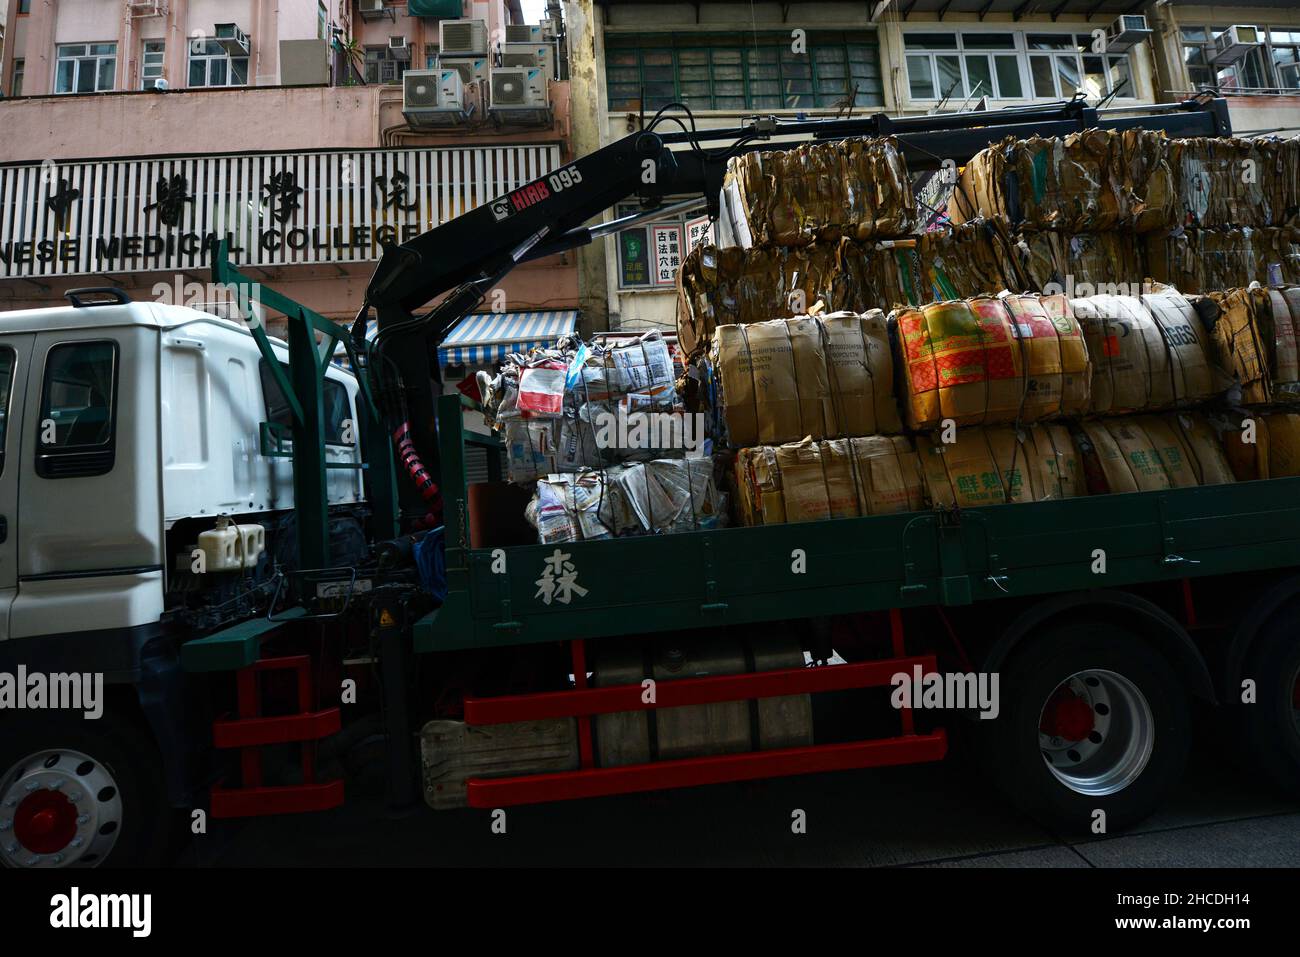 A truck carrying paper and cardboard for recycling in Hong Kong. Stock Photo